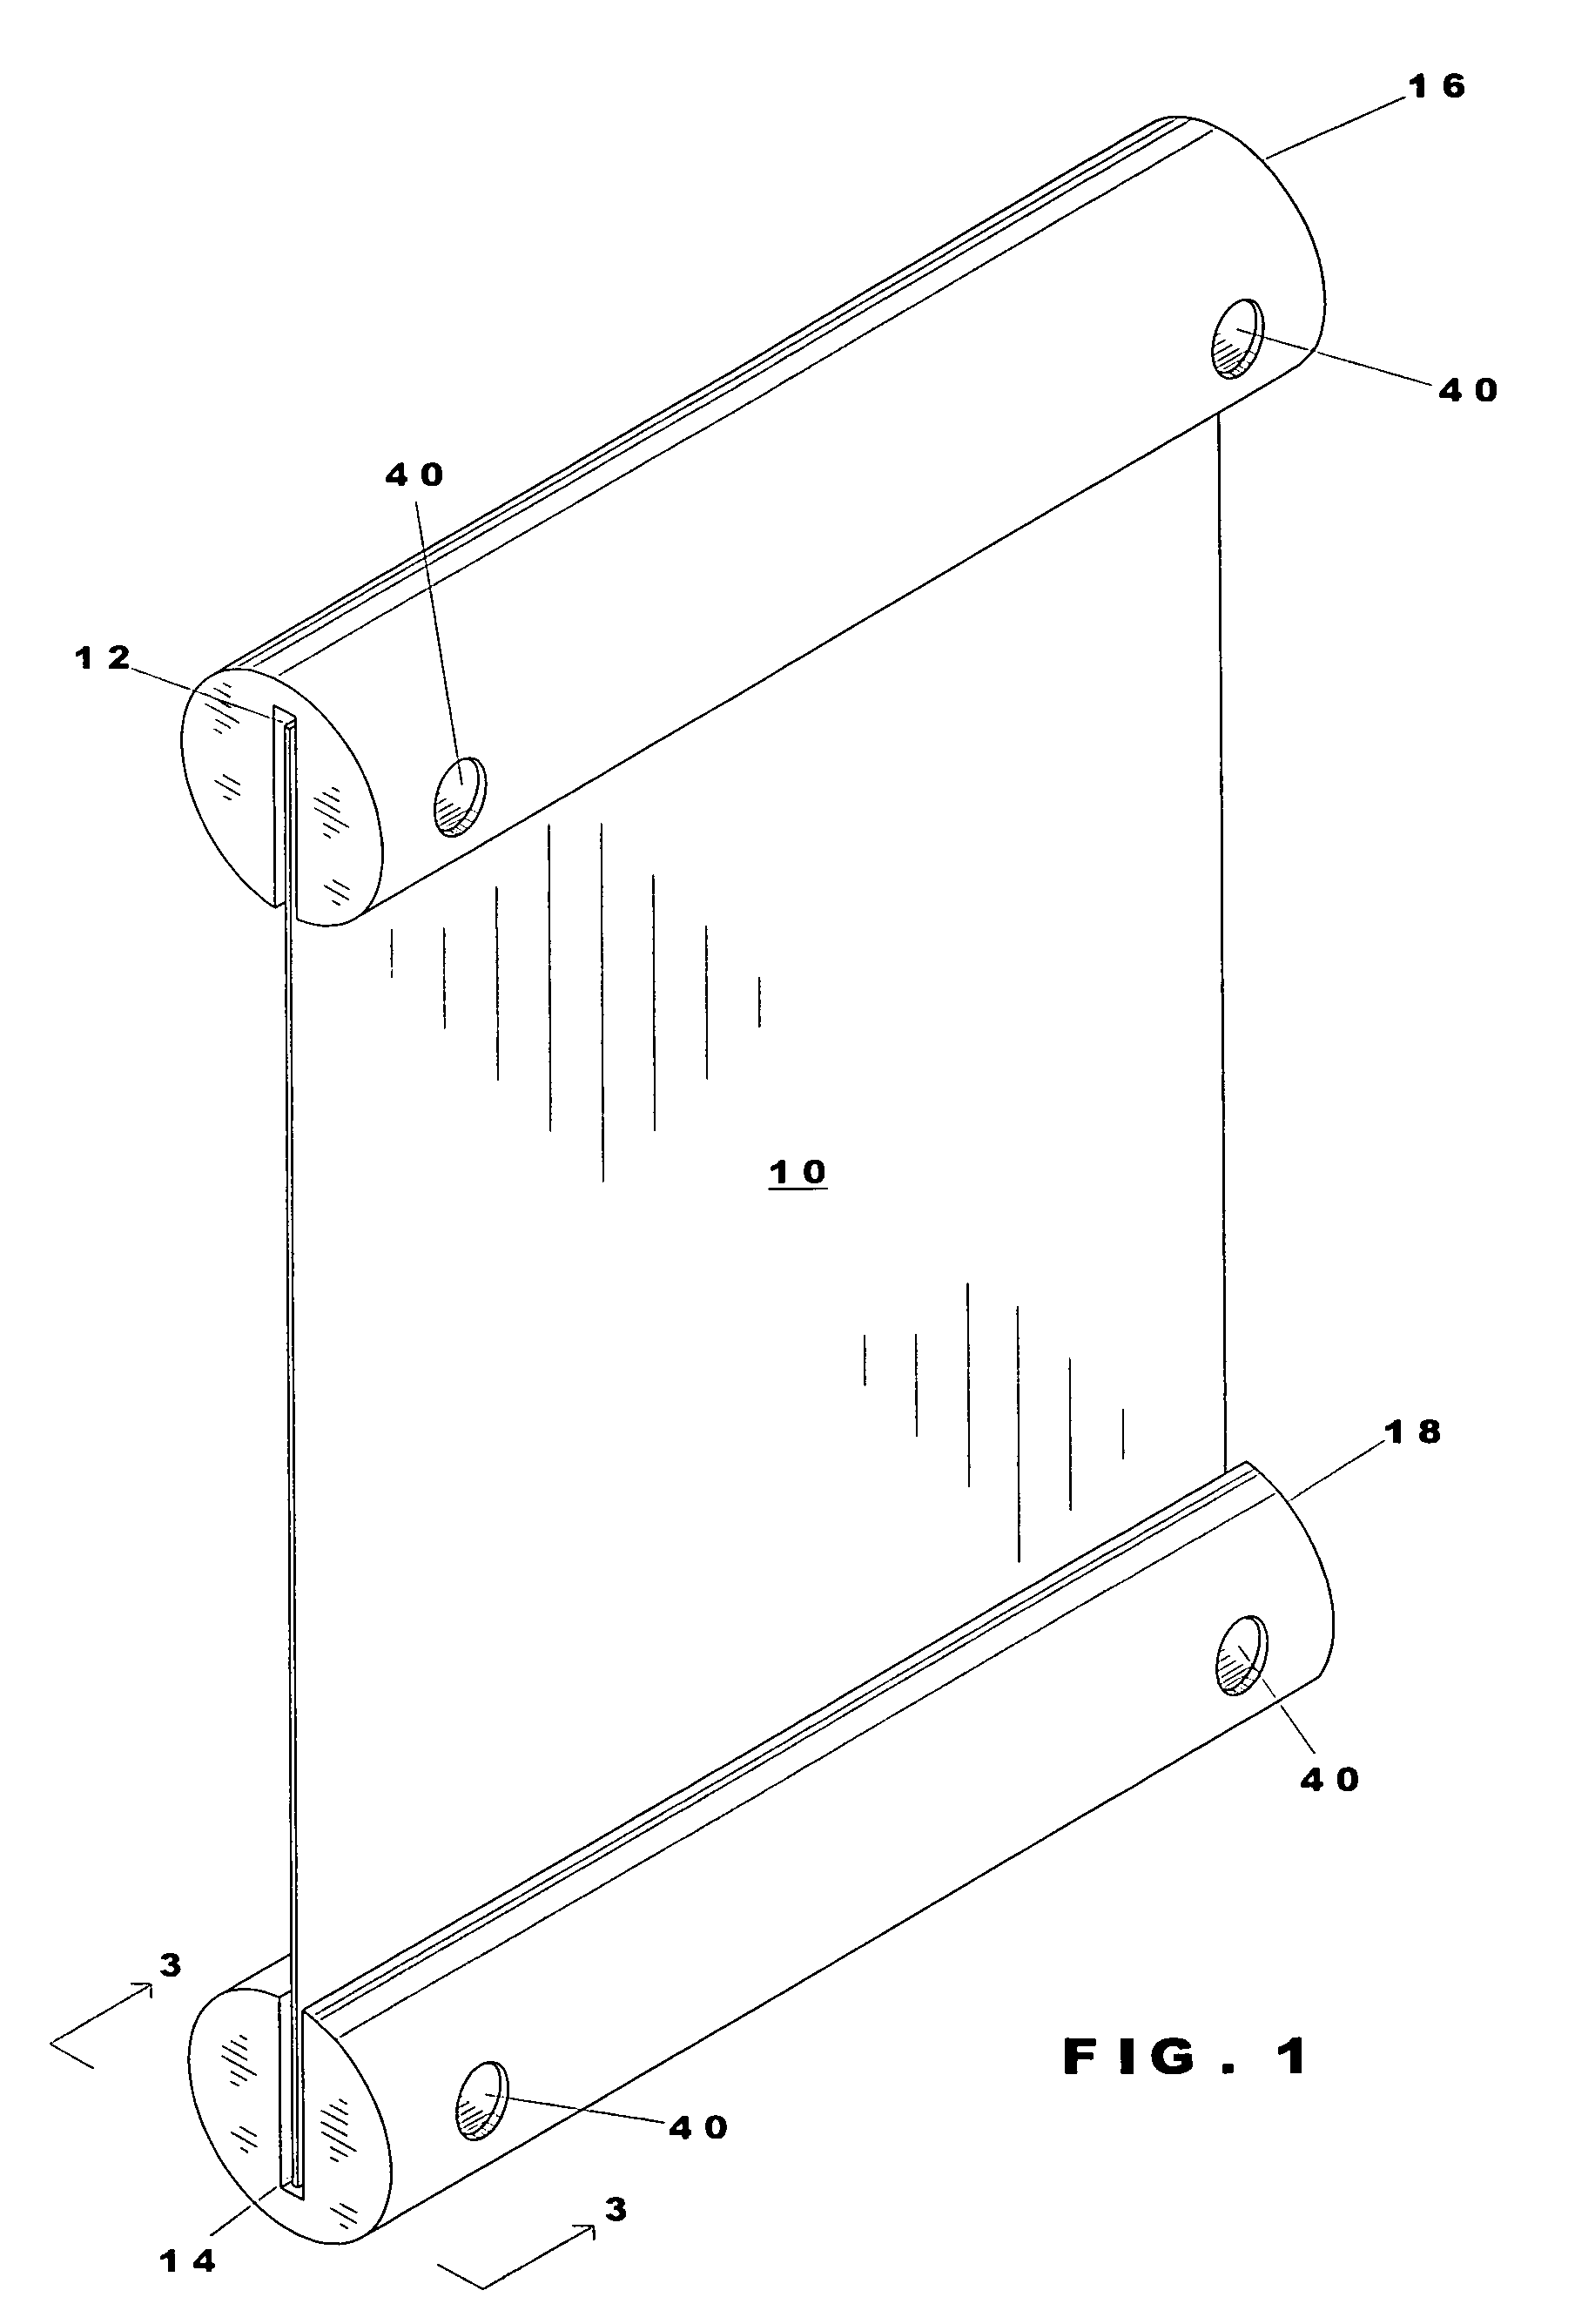 Apparatus for framing and hanging a sheet-like display item